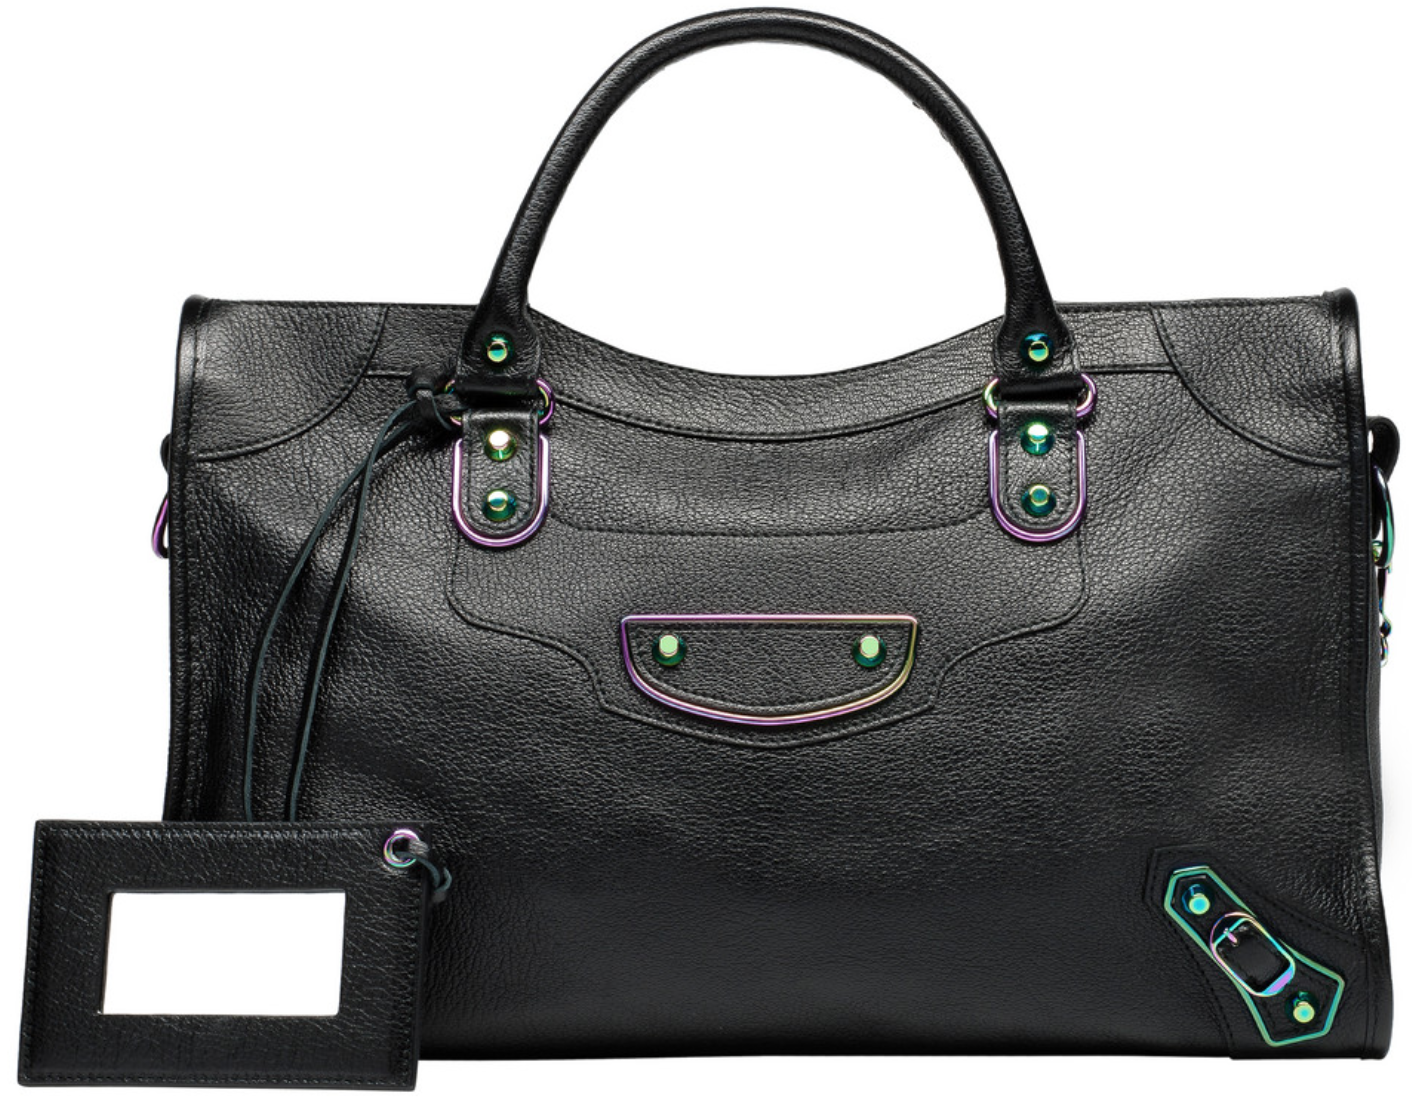 My Personal Thoughts On Balenciaga's Latest Iridescent Hardware